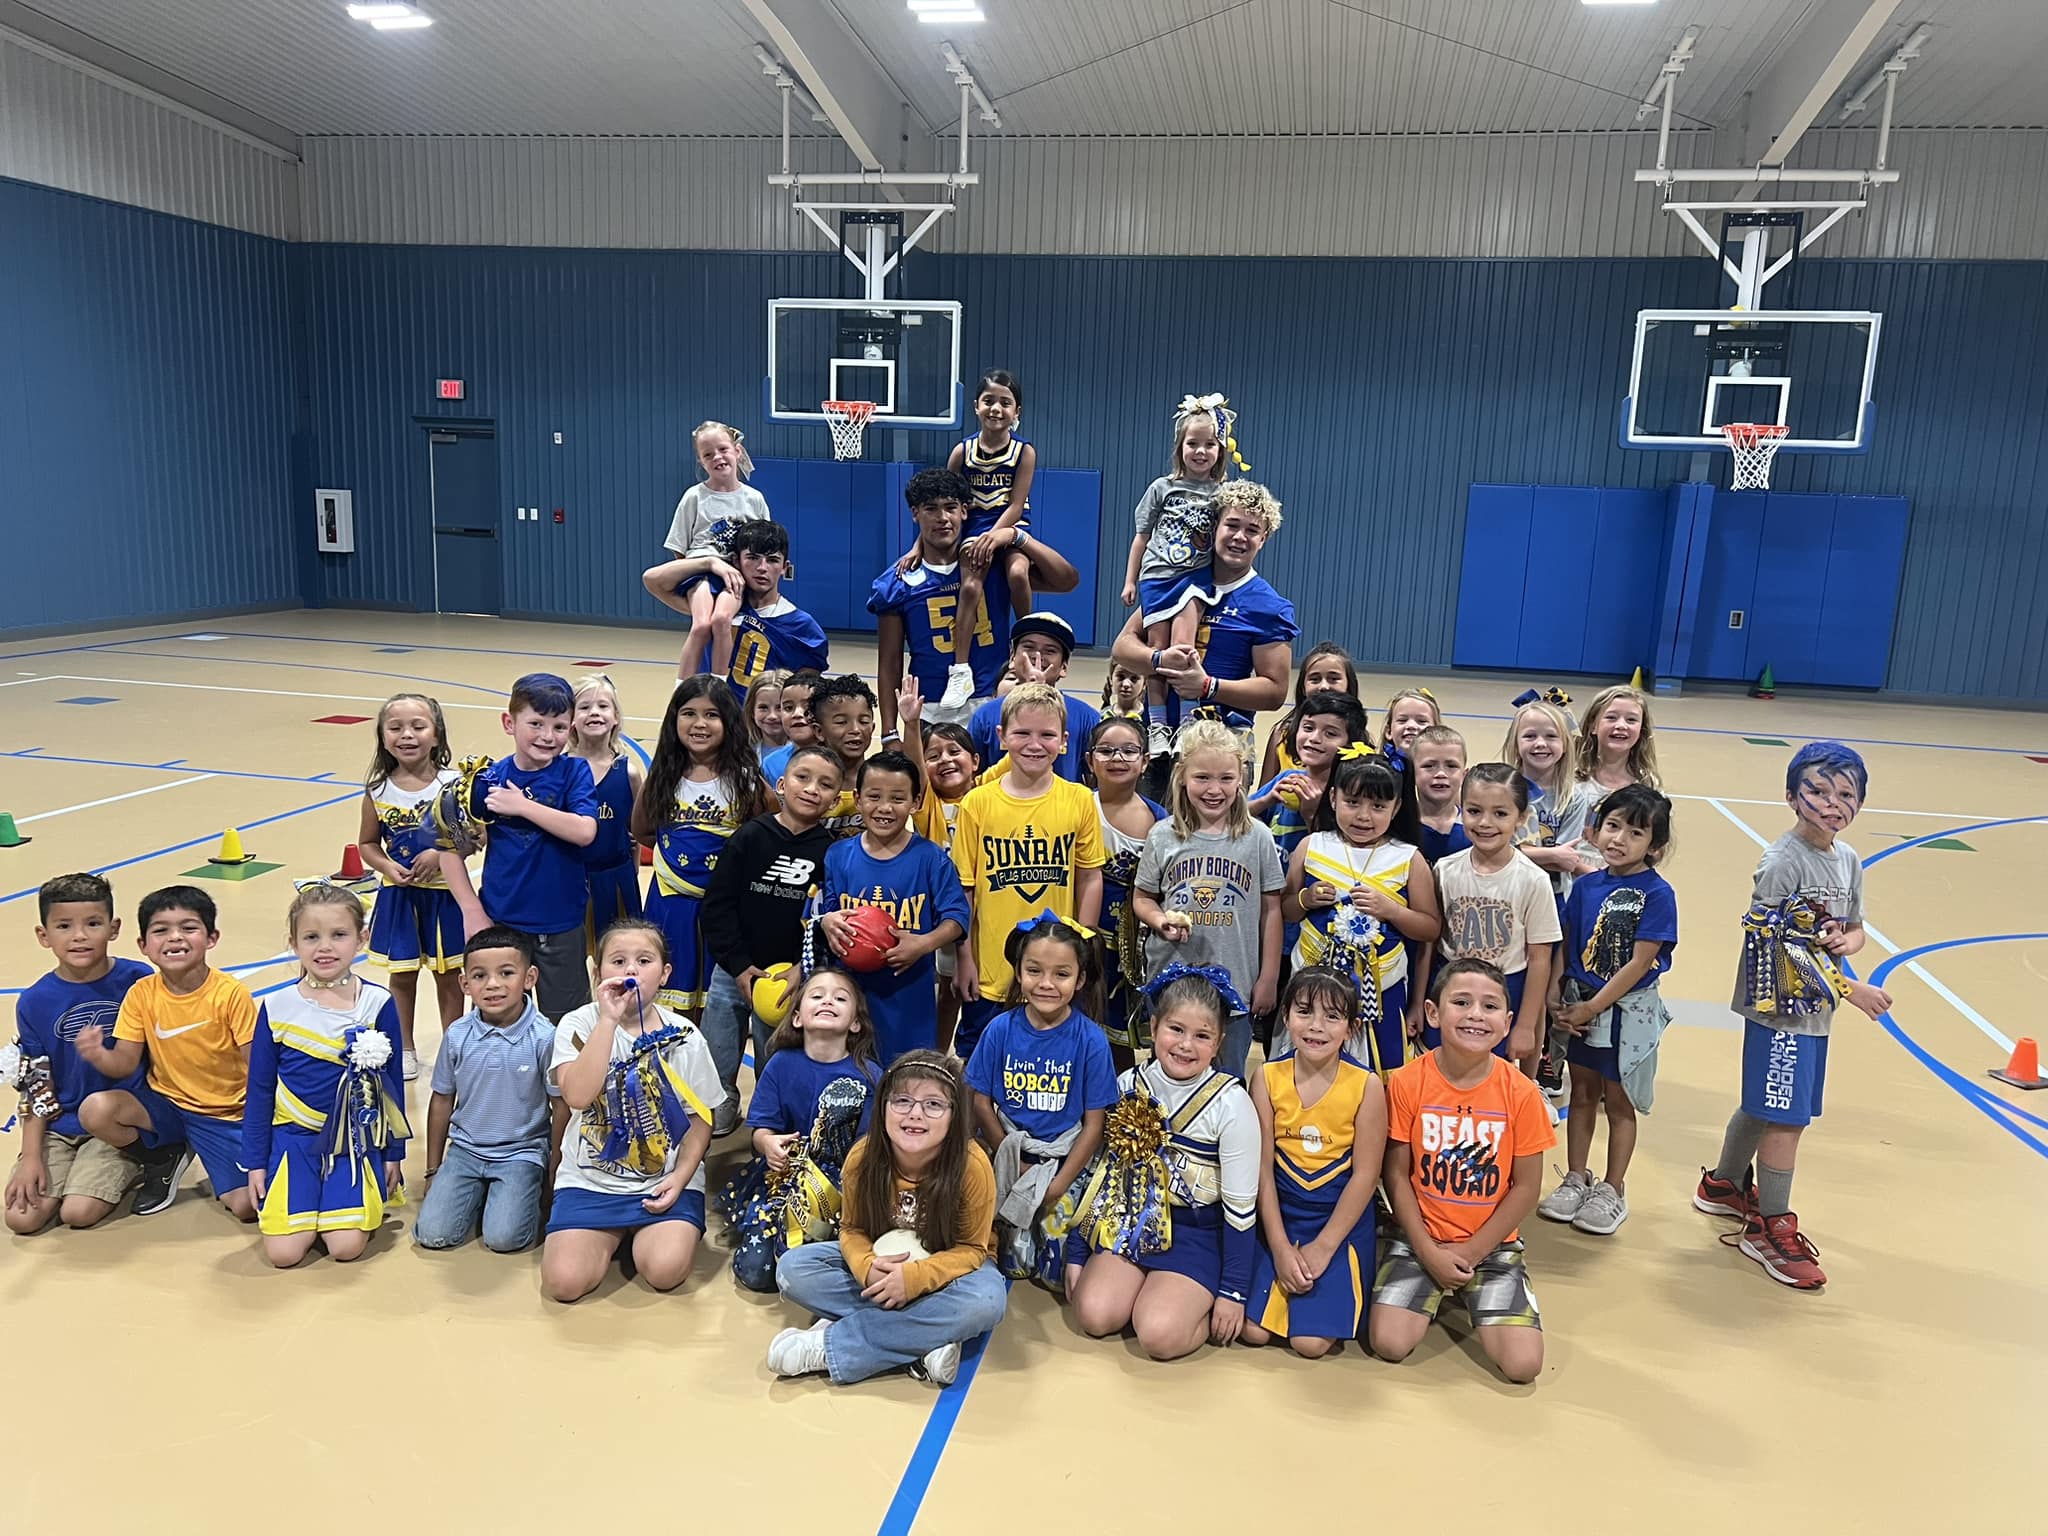 1st graders playing dodge ball with varsity players